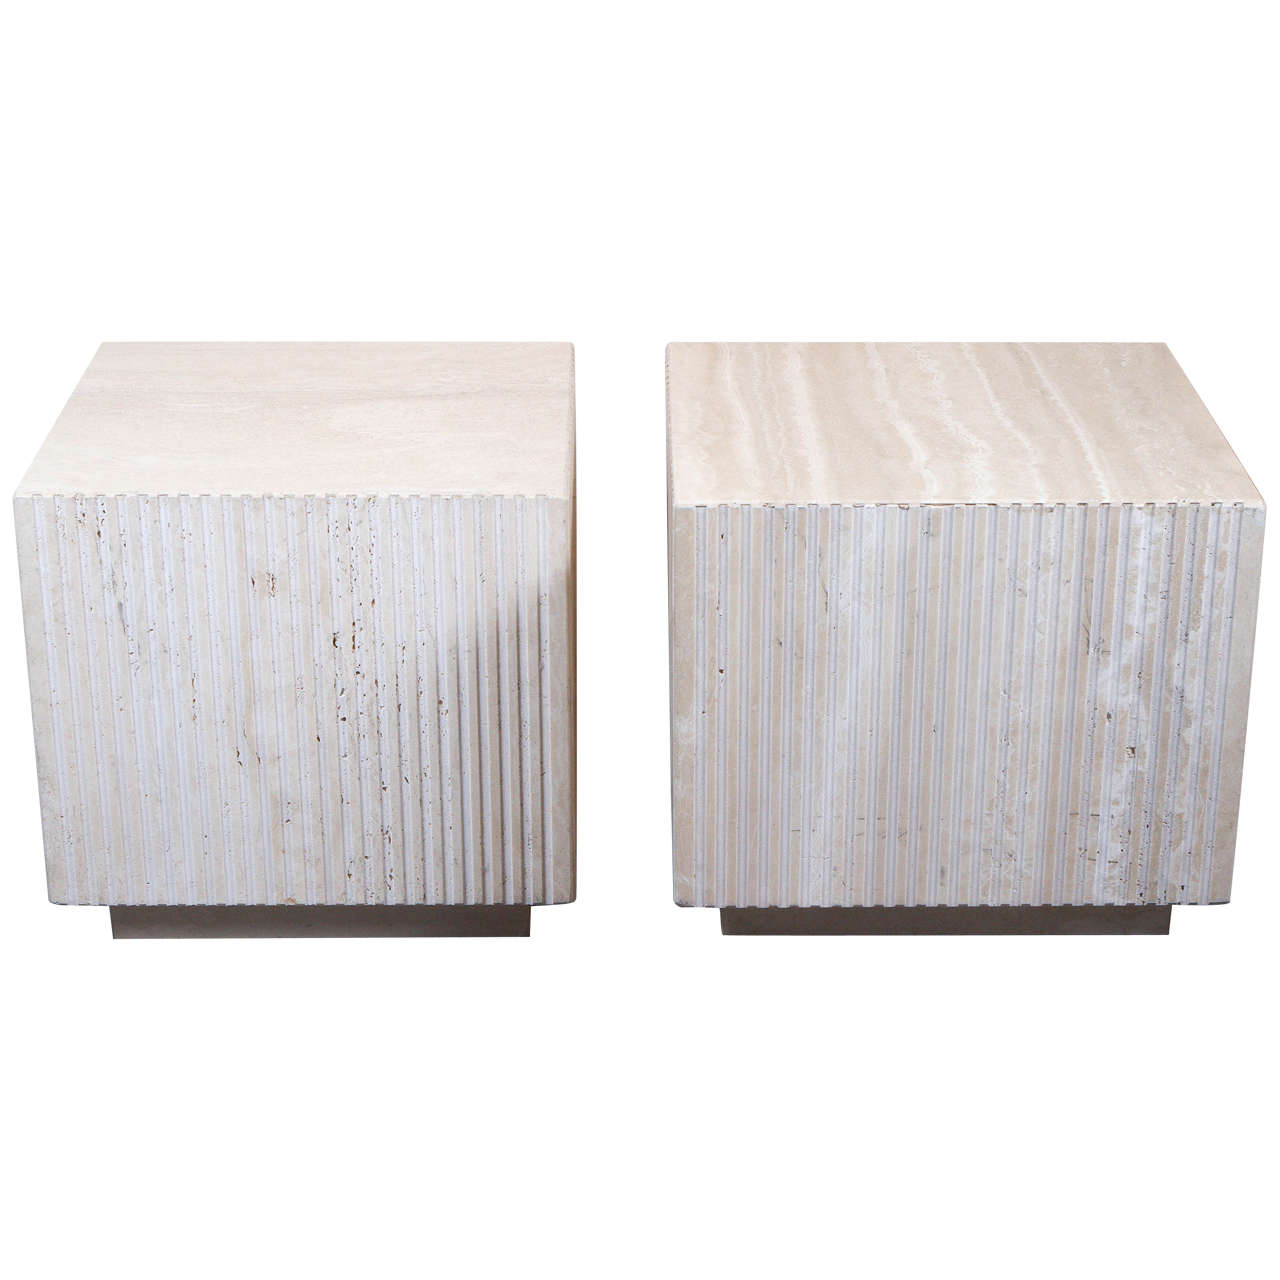 Pair of Polished Travertine Cubes